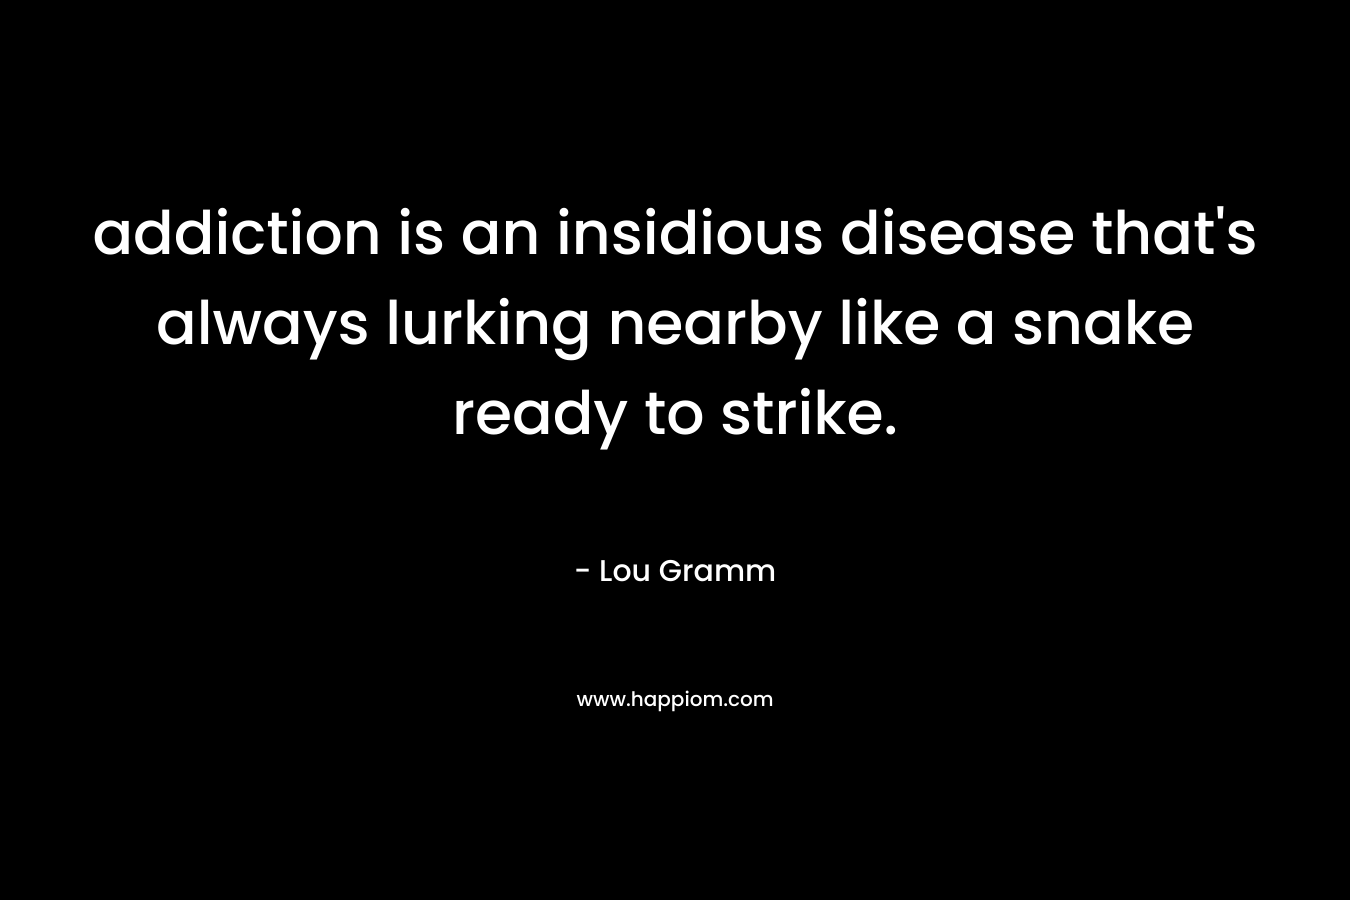 addiction is an insidious disease that’s always lurking nearby like a snake ready to strike. – Lou Gramm